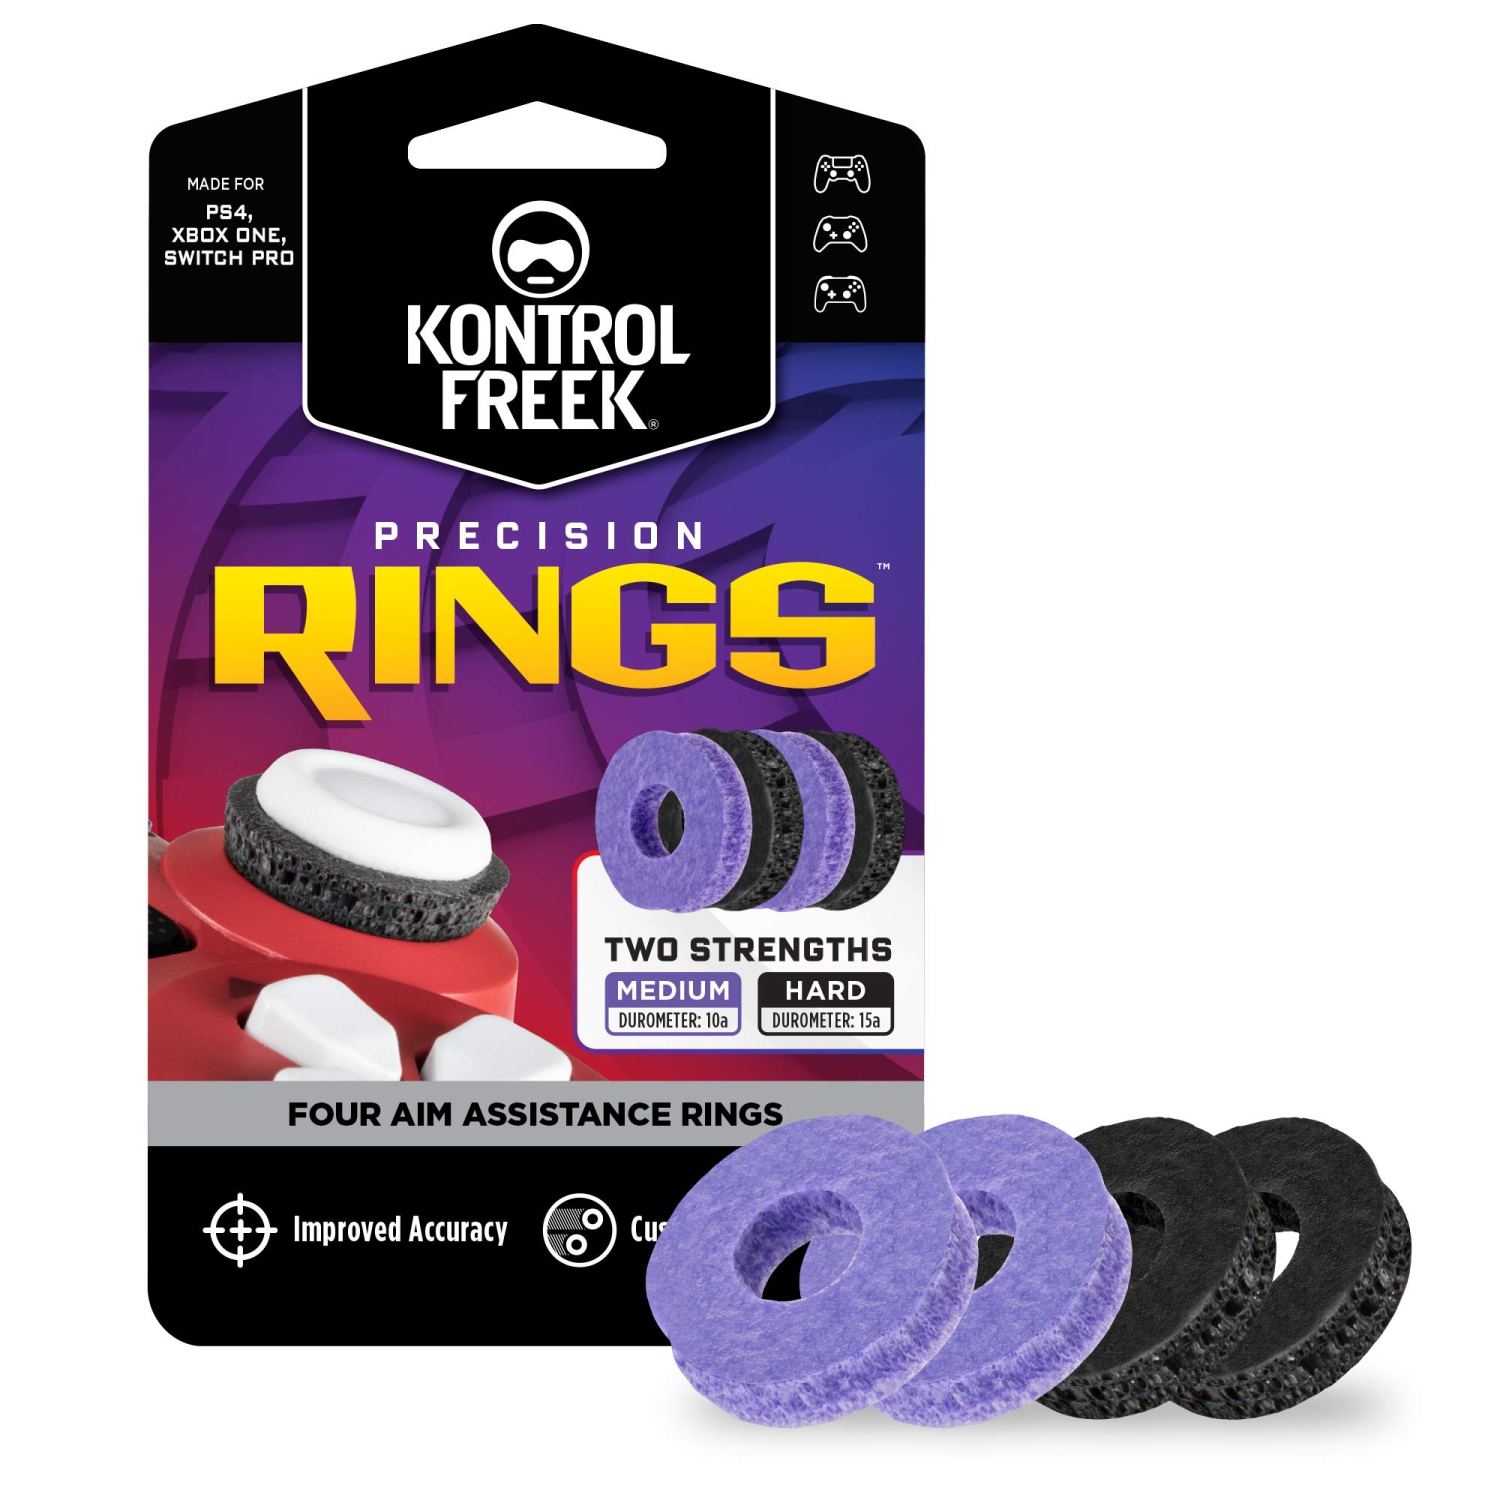 KontrolFreek Precision Rings, Aim Assist Motion Control for PlayStation 4 ( PS4), PlayStation 5 (PS5), Xbox One, Xbox Series